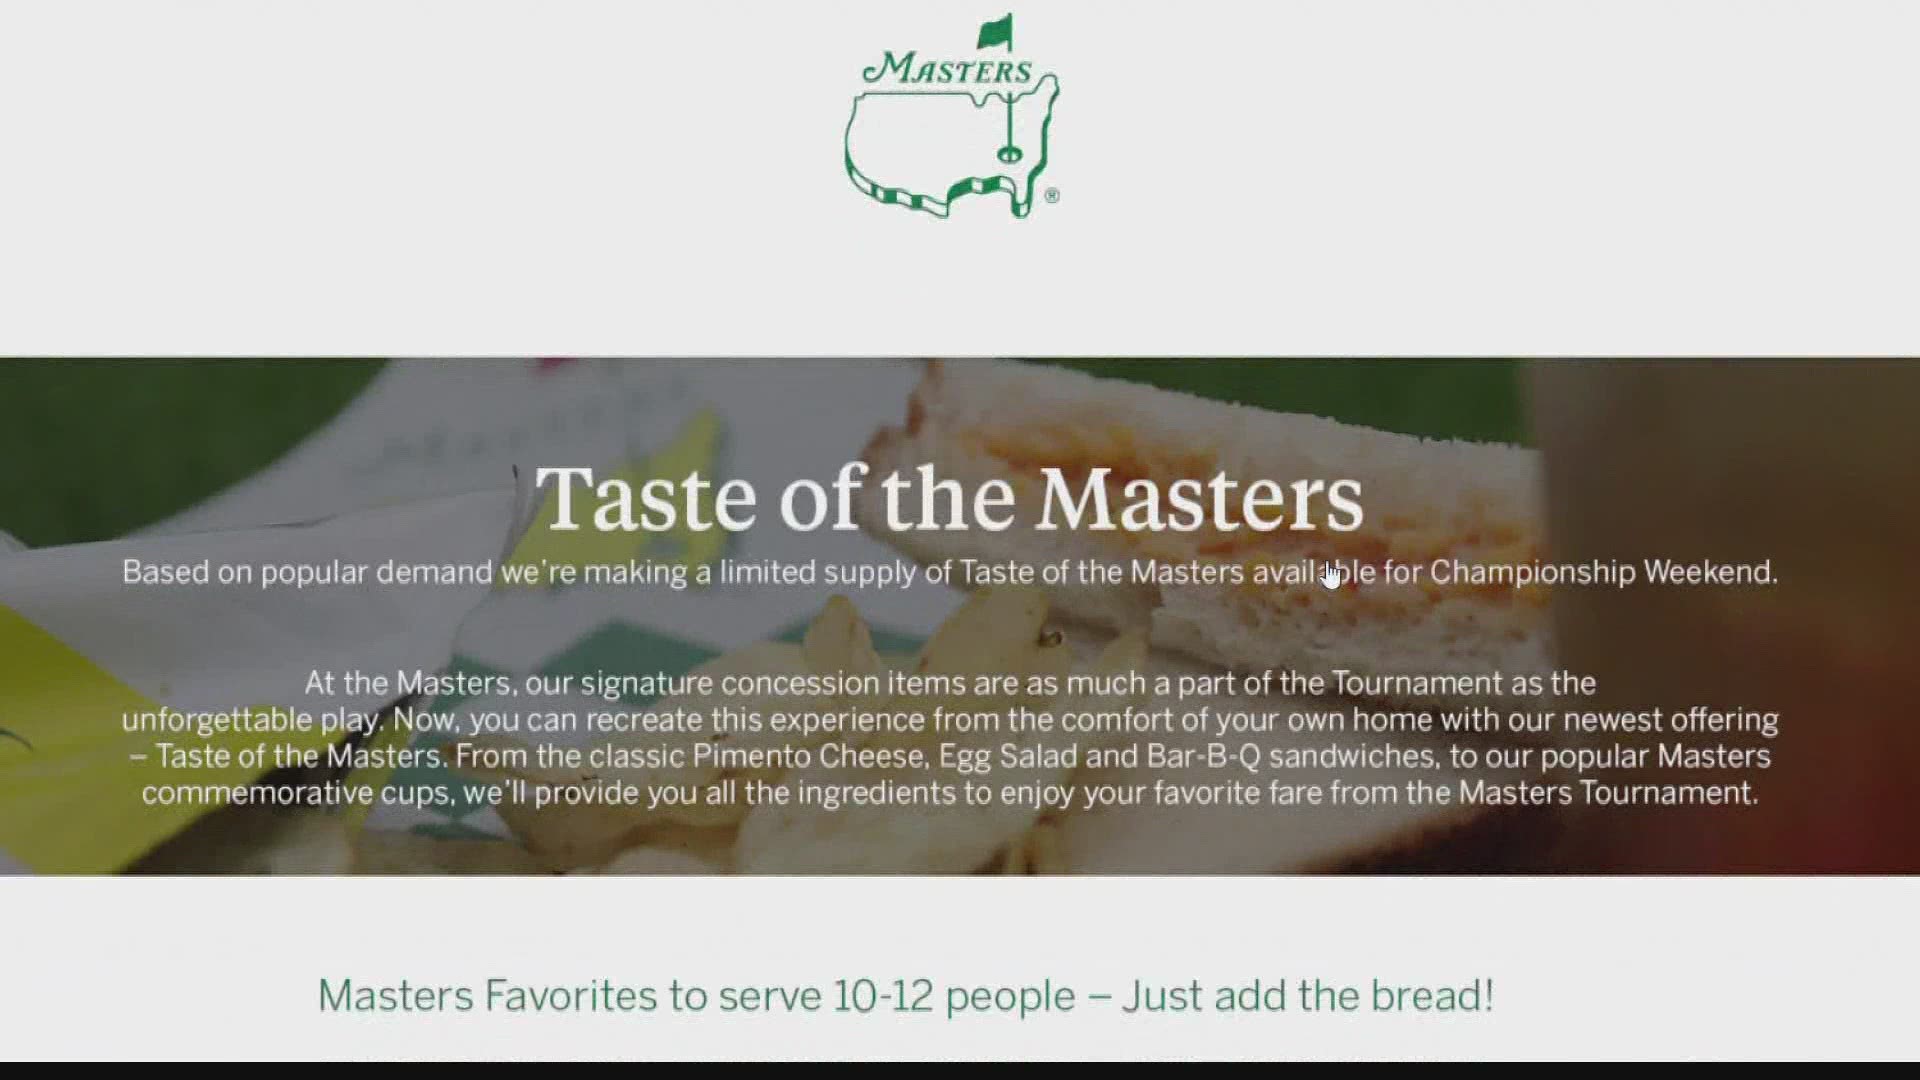 Augusta National is giving online access to signature concession items, including one pound of pimento cheese.